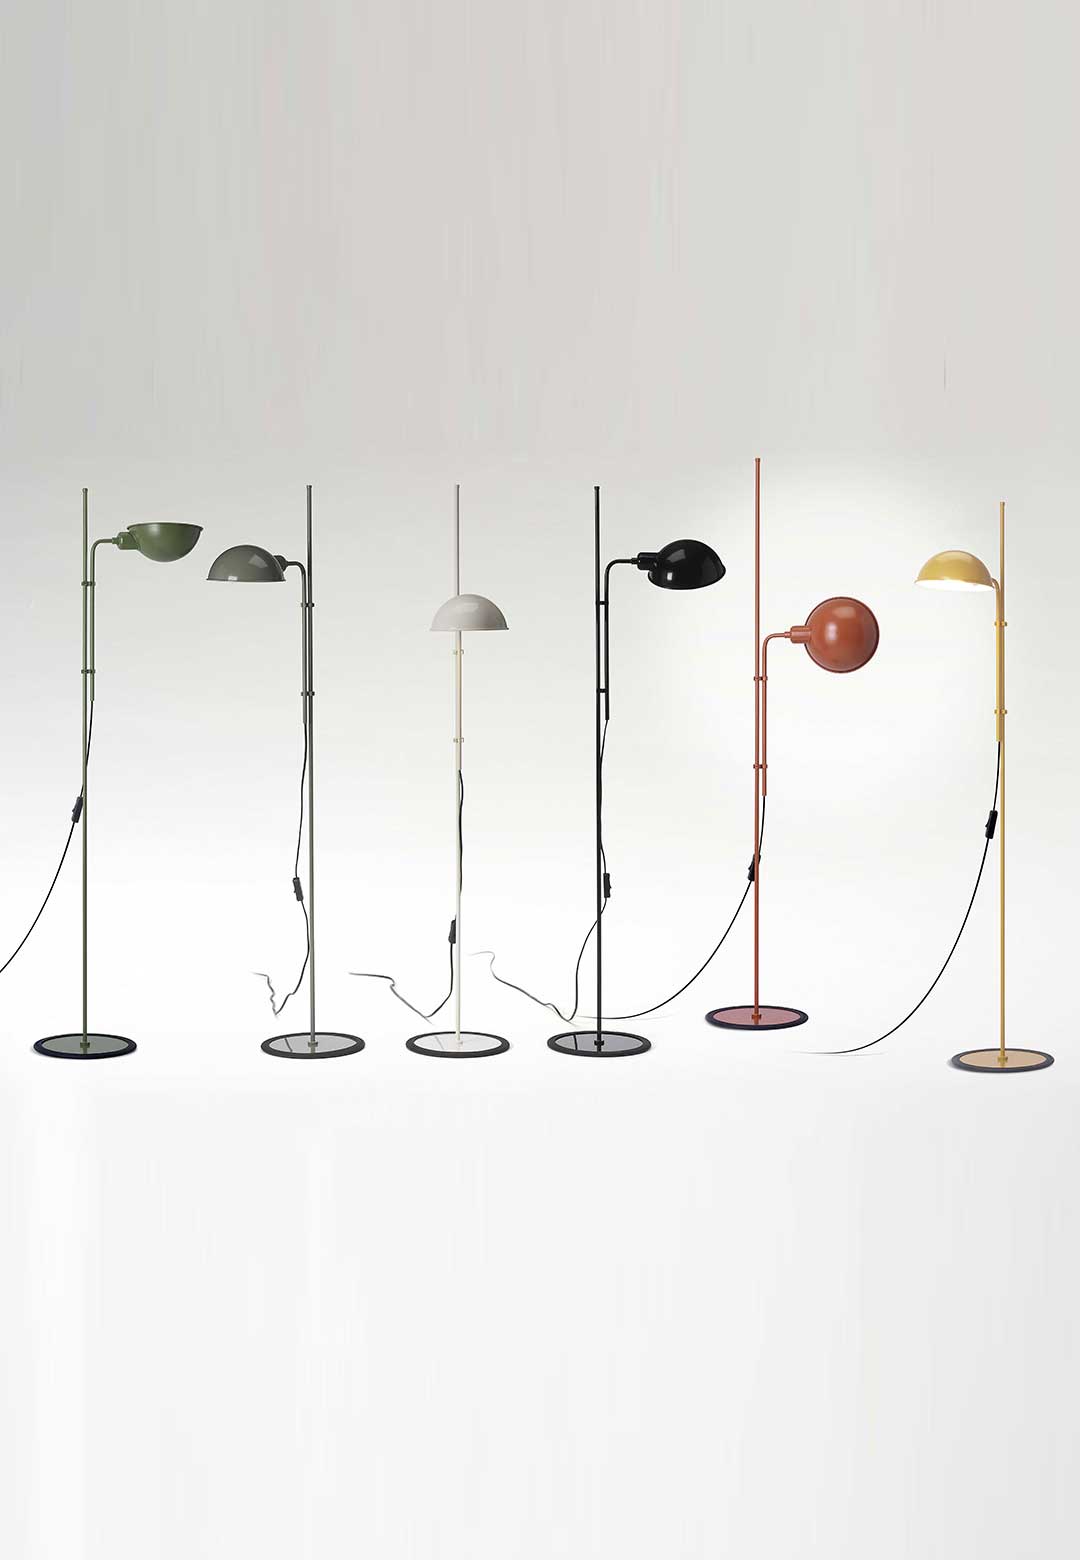 Marset re-launches the Funiculí lamp collection in earthy shades